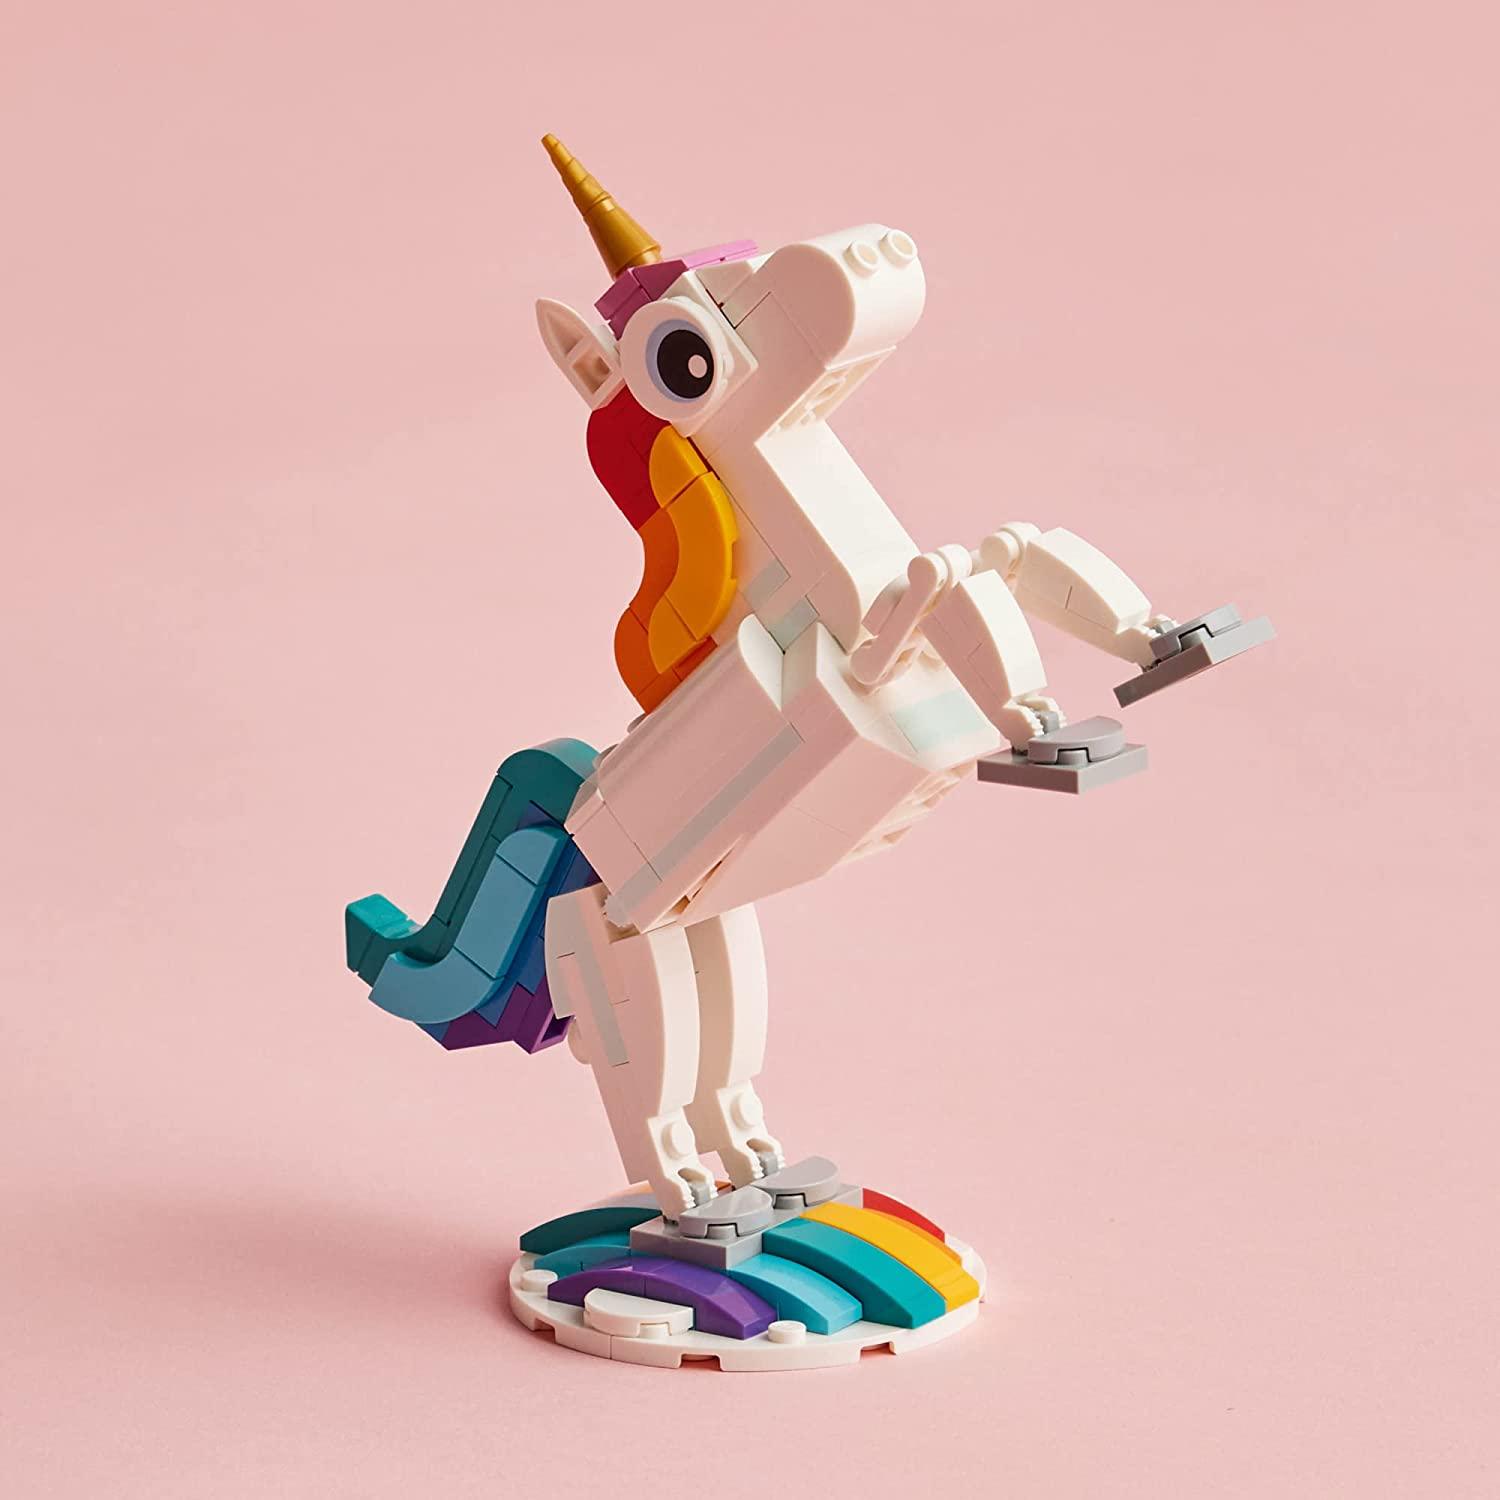 LEGO 31140 Creator 3 in 1 Magical Unicorn Toy to Seahorse to Peacock - BumbleToys - 5-7 Years, Boys, Creator, Creator 3In1, LEGO, OXE, Pre-Order